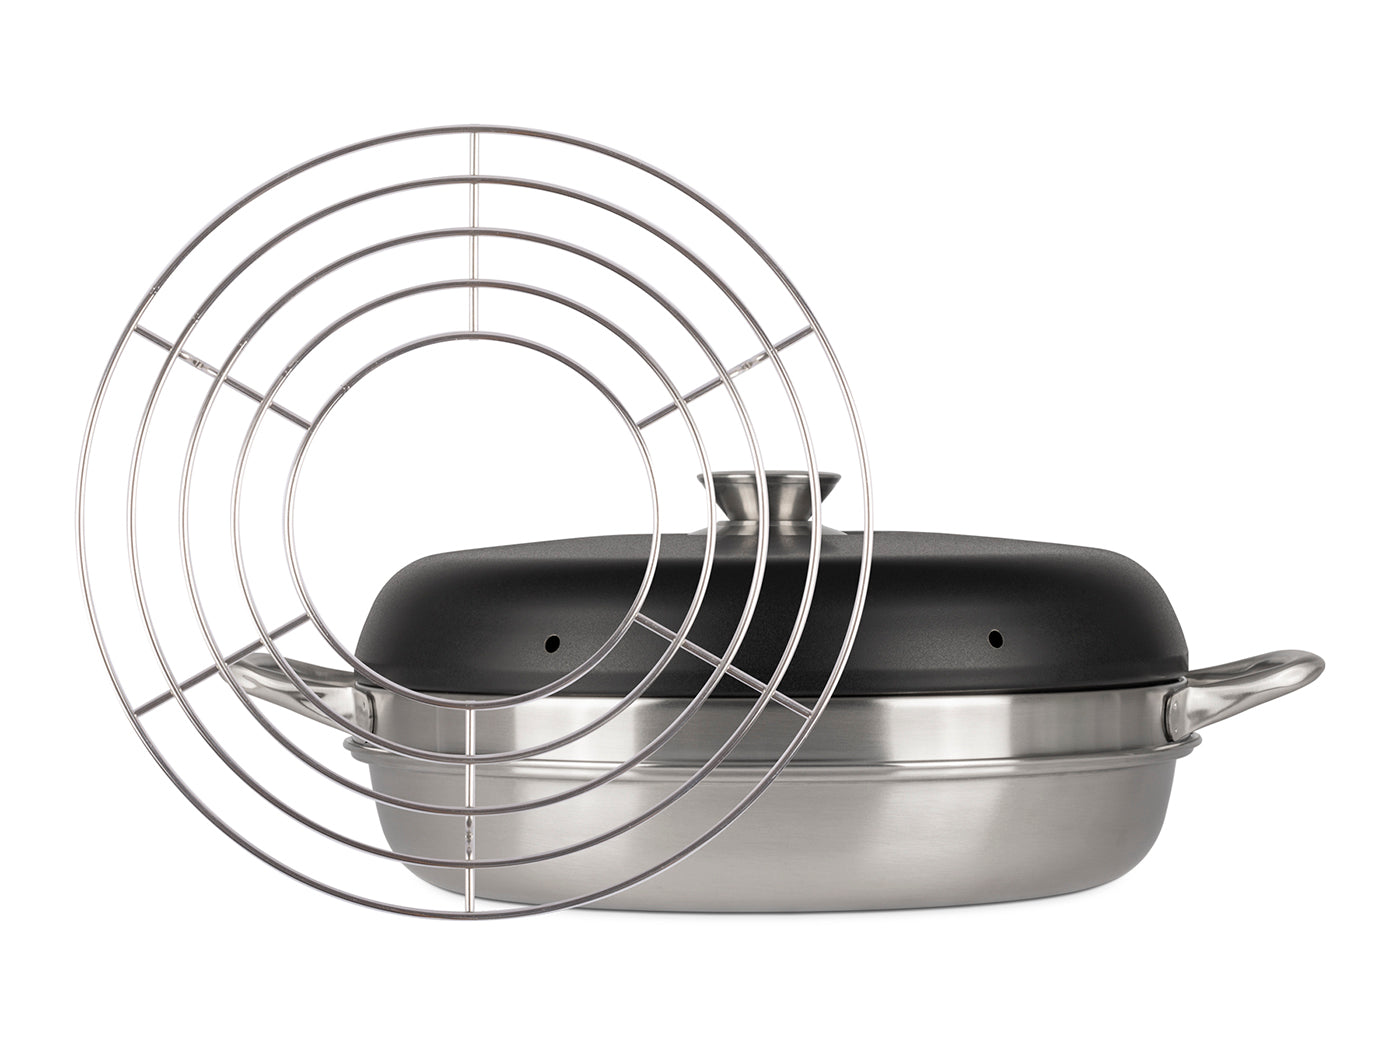 Petromax Grill rack for the Campo oven pan